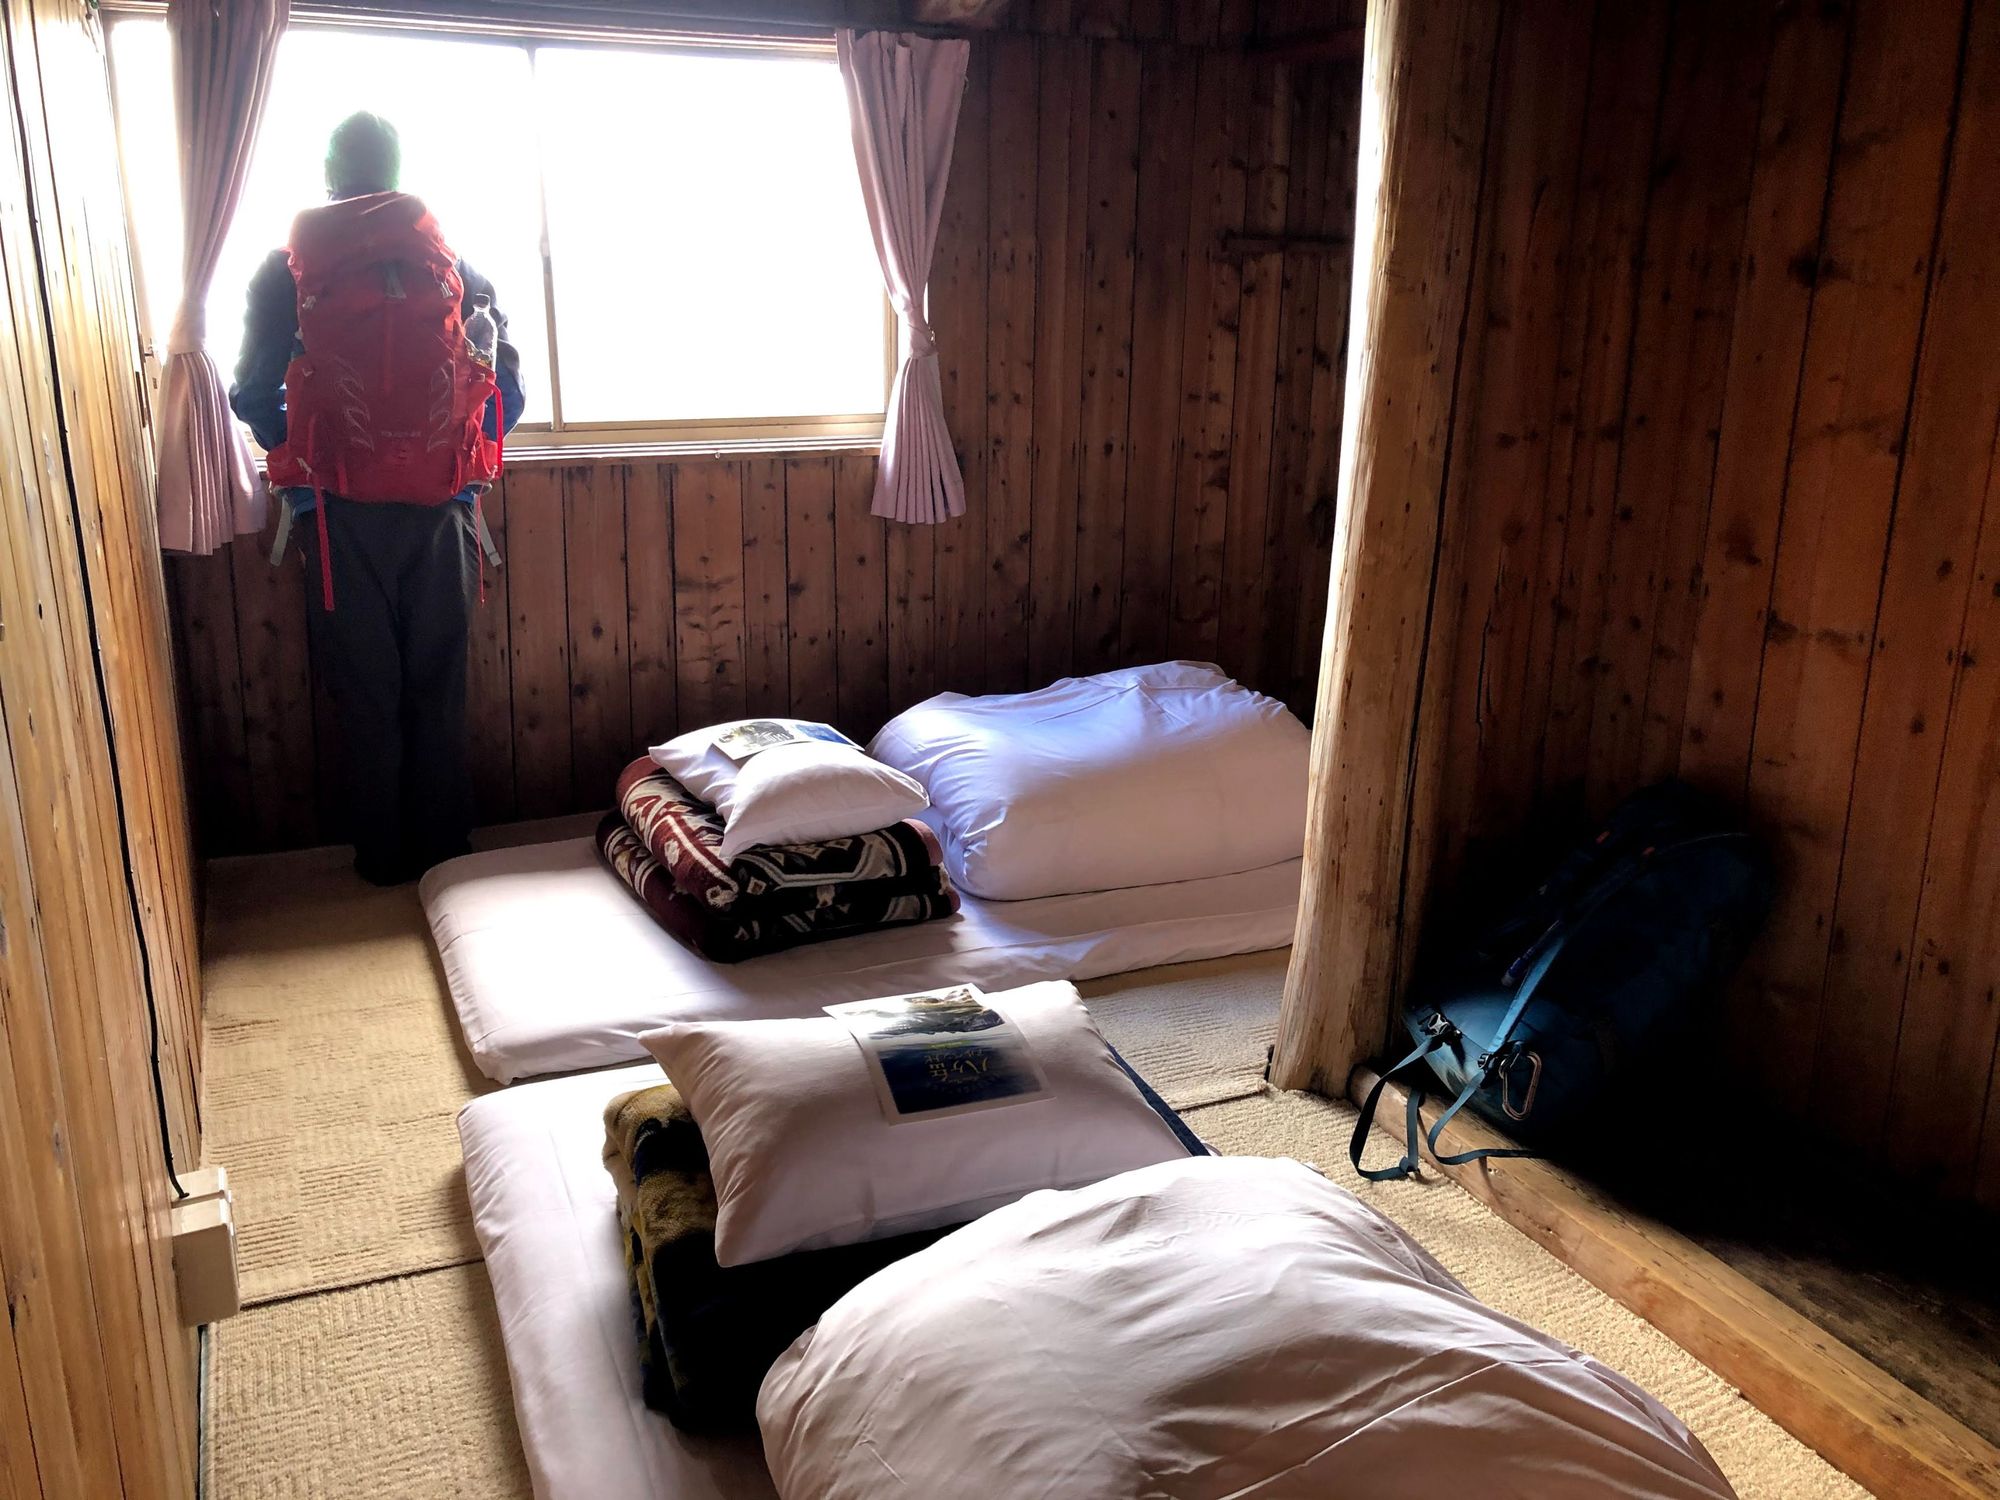 A dormitory in a Japanese mountain hut, with tatami sleeping mats